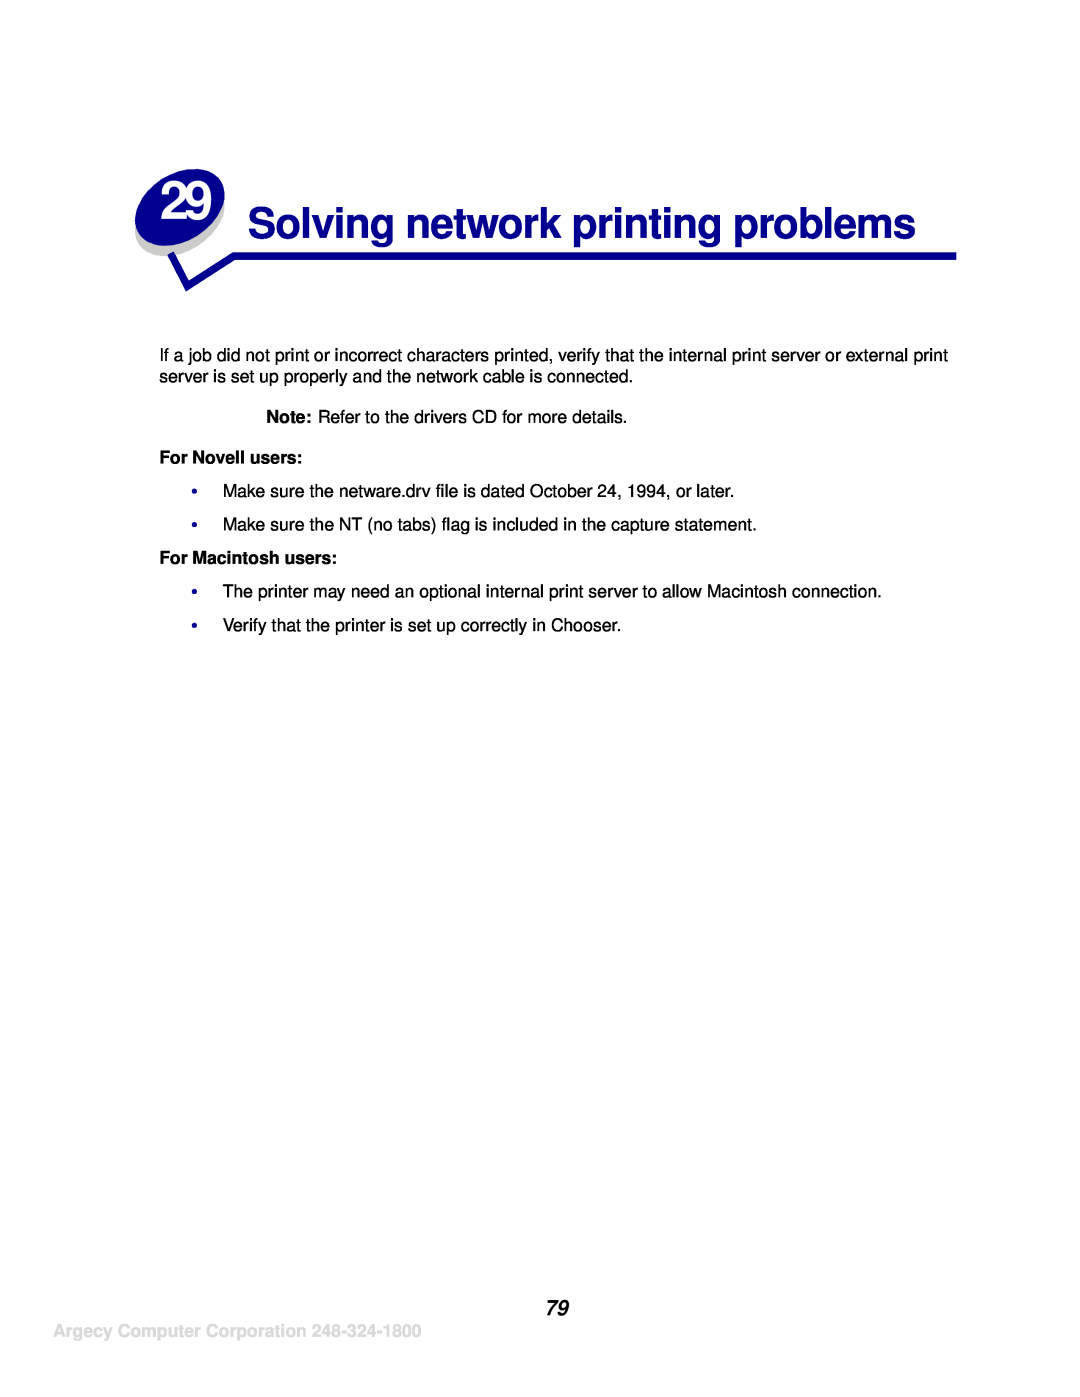 IBM 1120, 1125 manual Solving network printing problems, For Novell users, For Macintosh users, Argecy Computer Corporation 